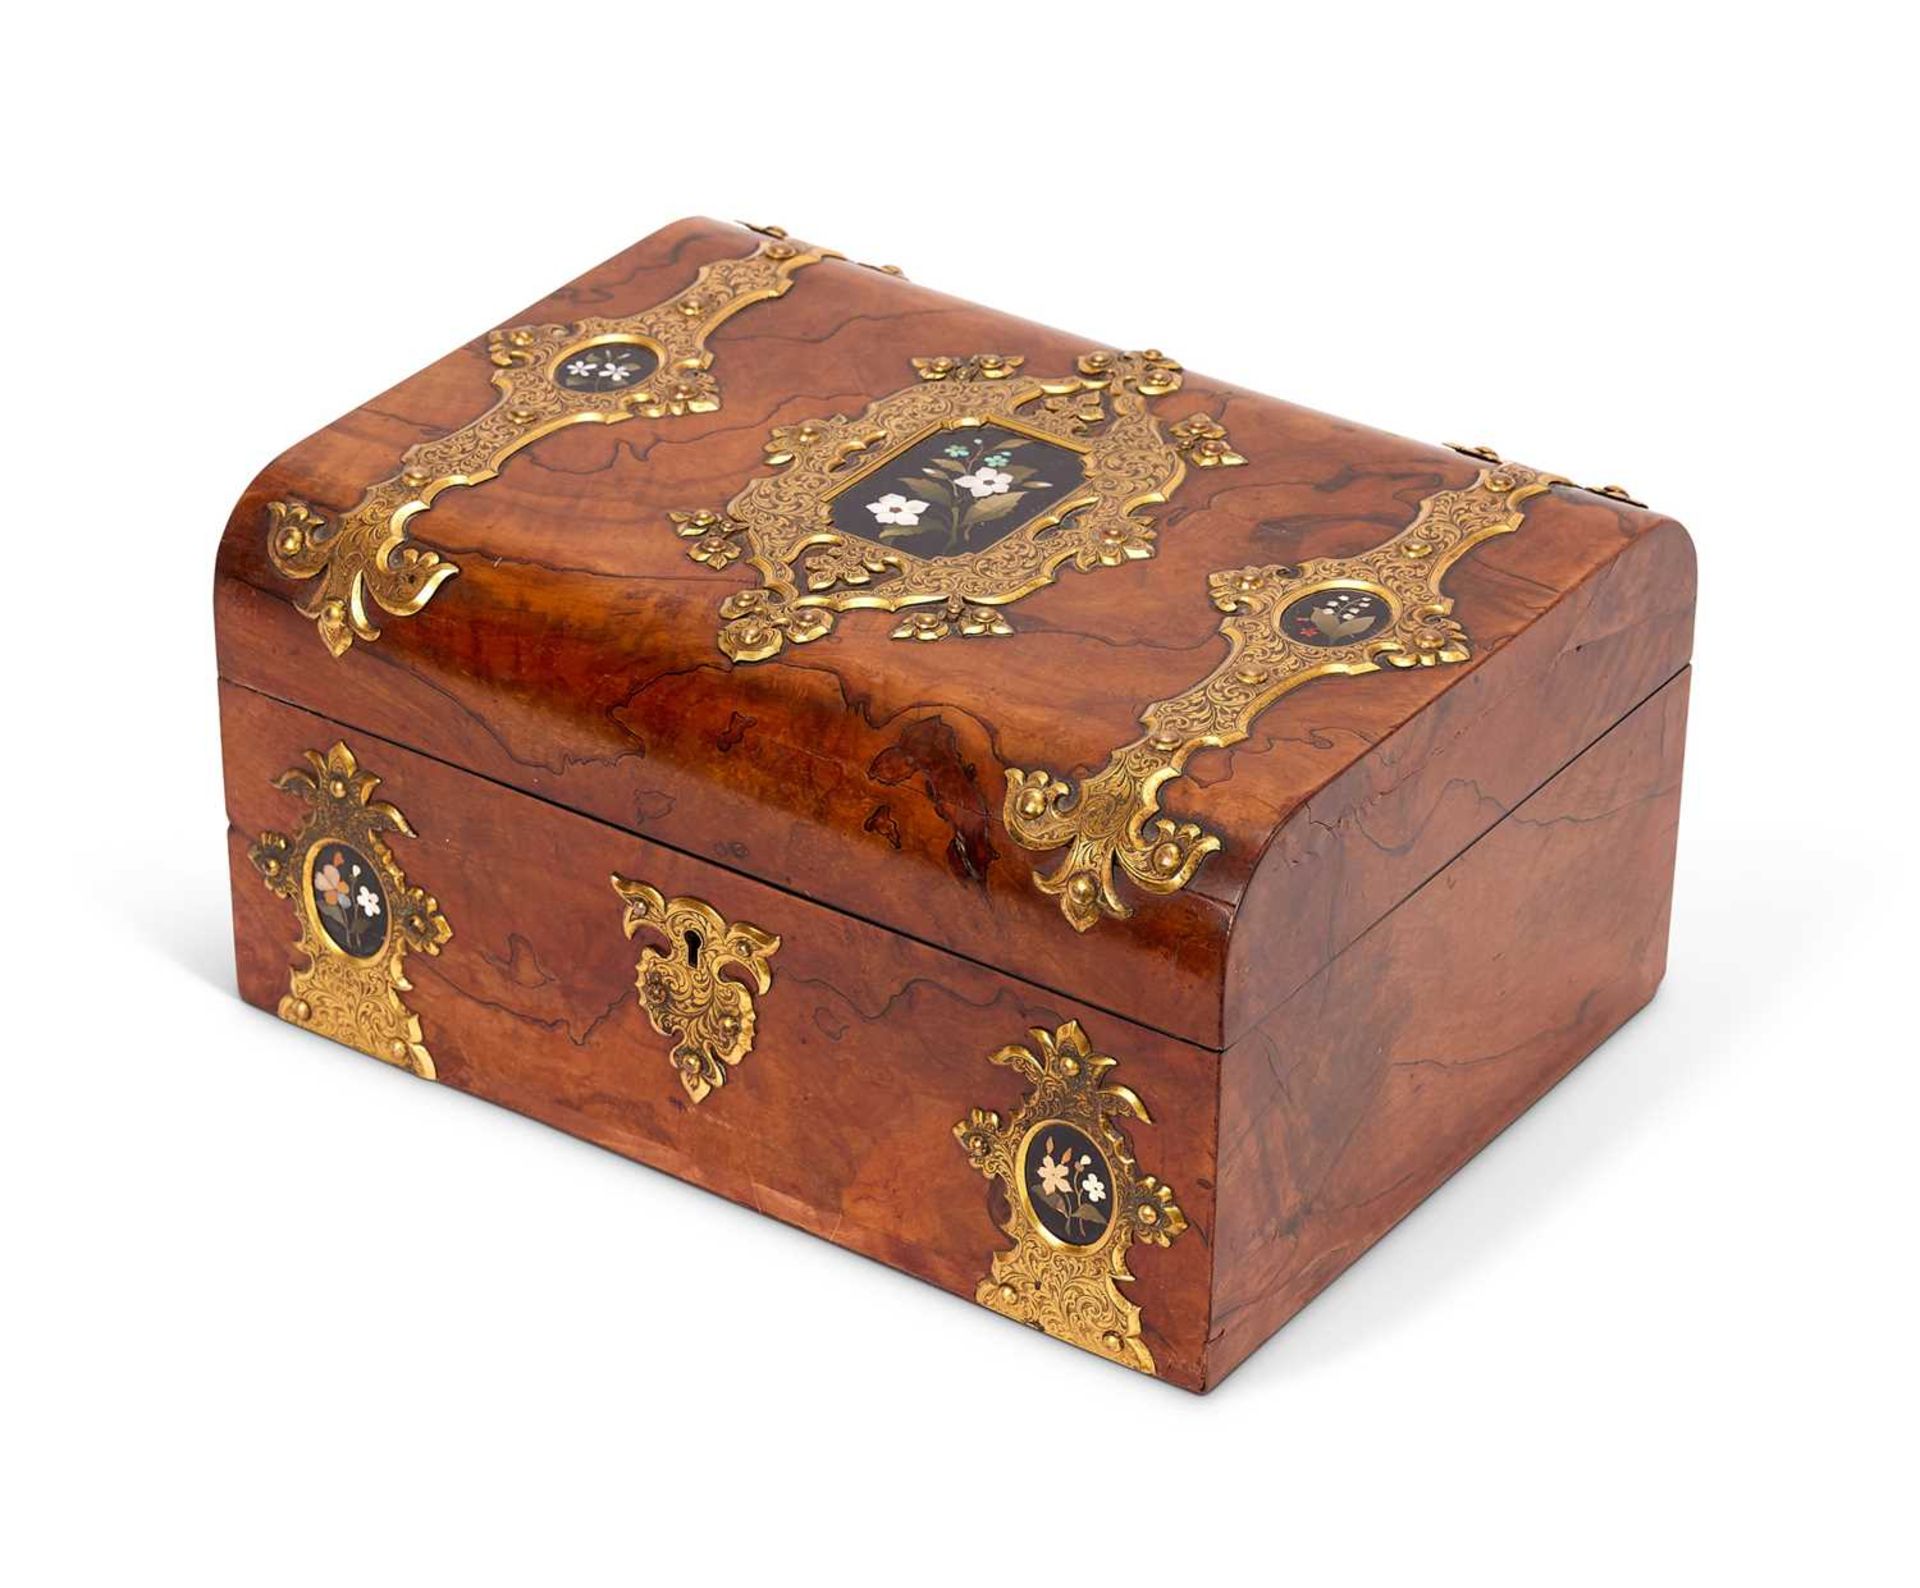 A 19TH CENTURY BURR WALNUT AND PIETRA DURA MOUNTED BOX BY BETJEMANNS & SONS